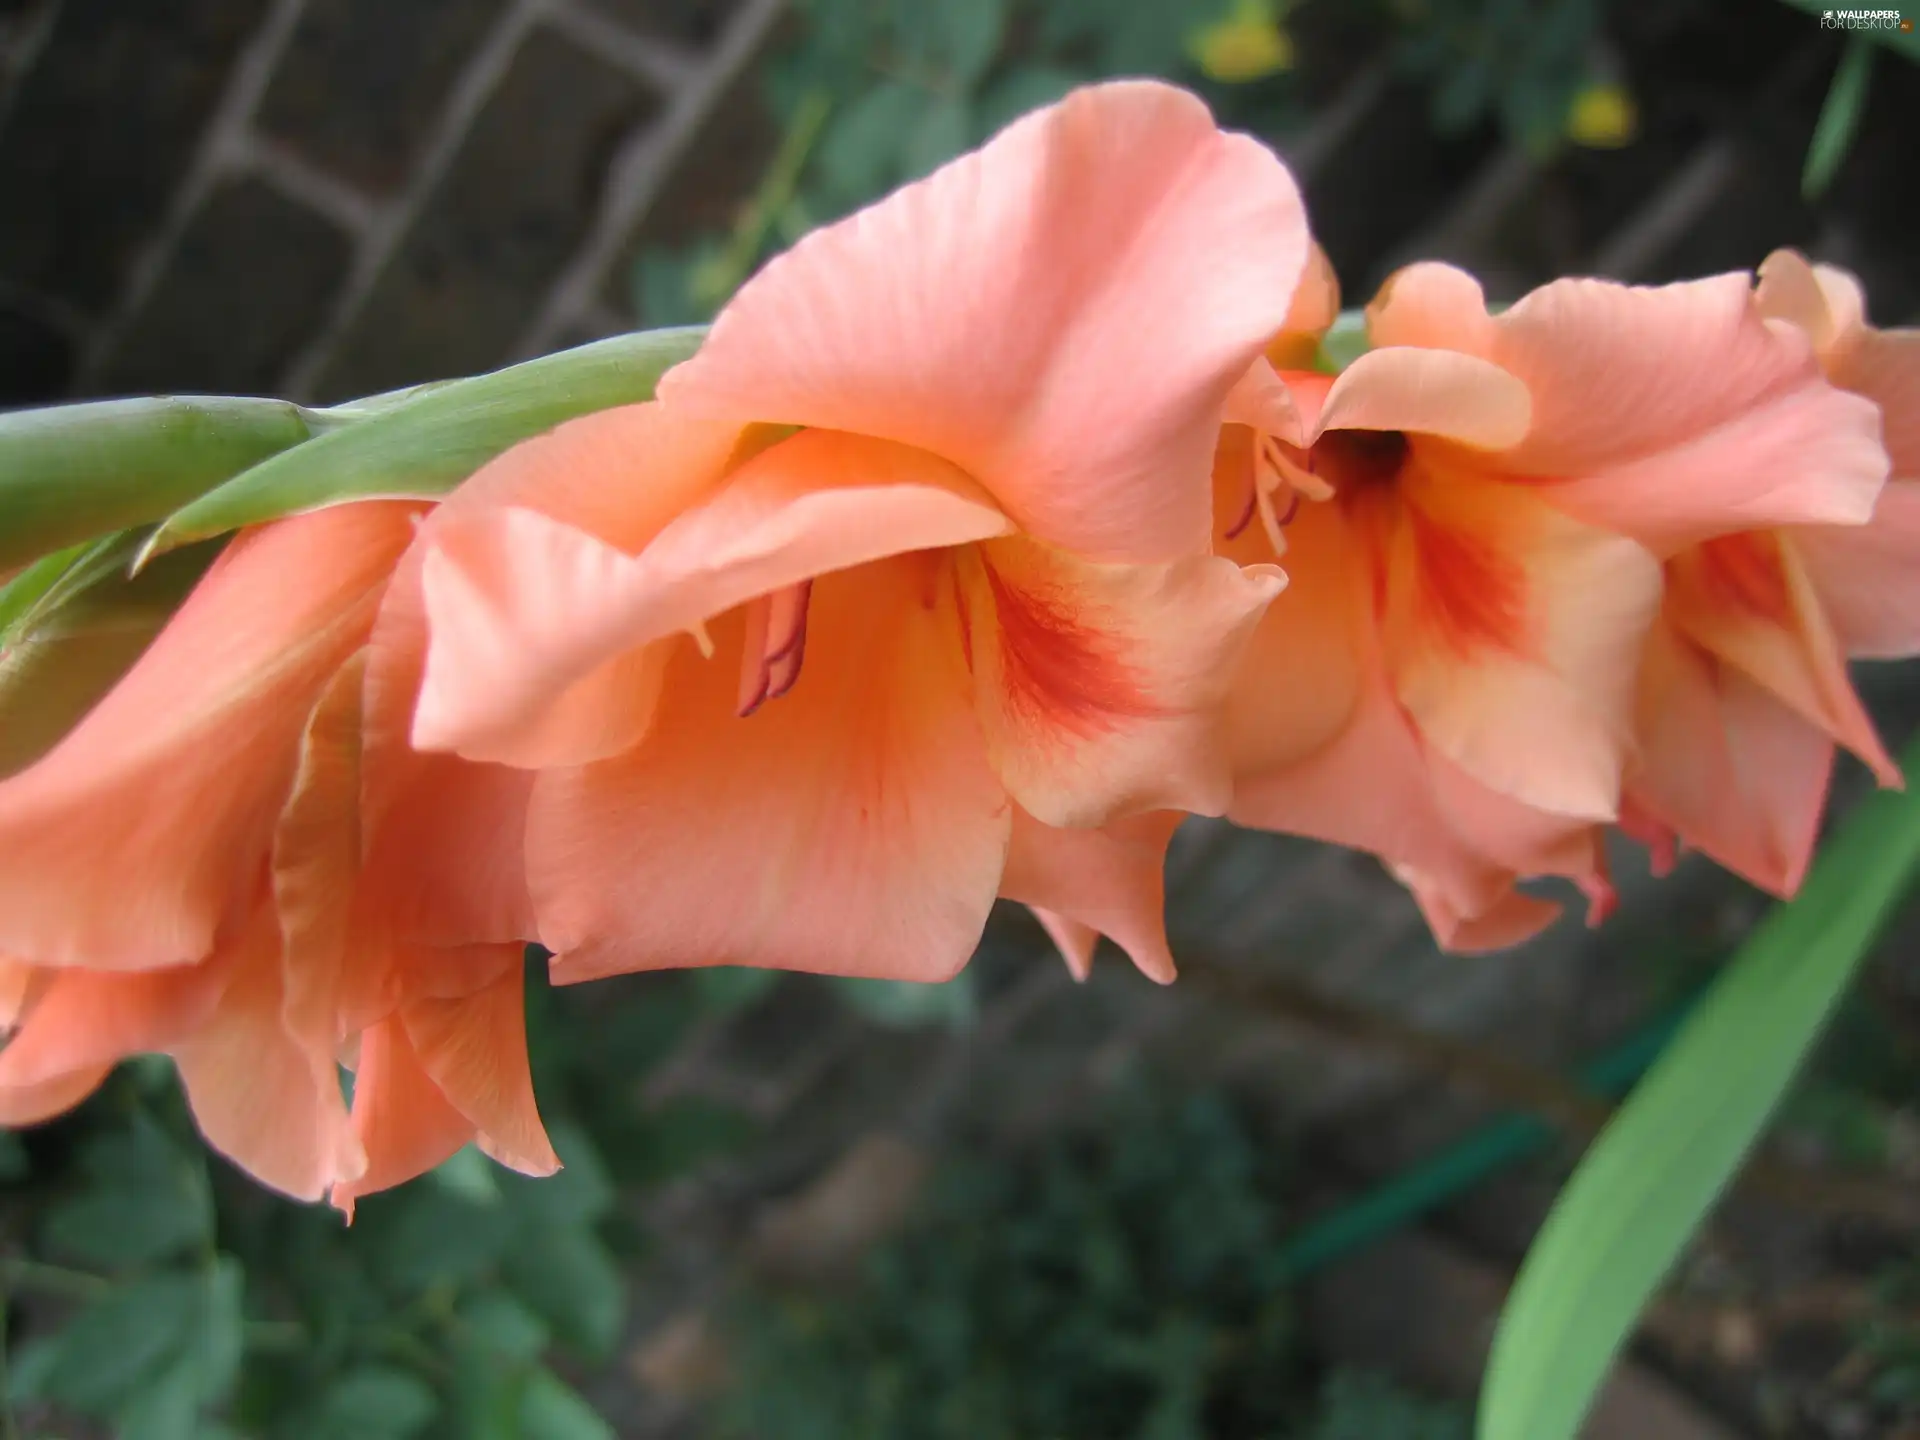 peach, gladiolus - For desktop wallpapers: 3072x2304